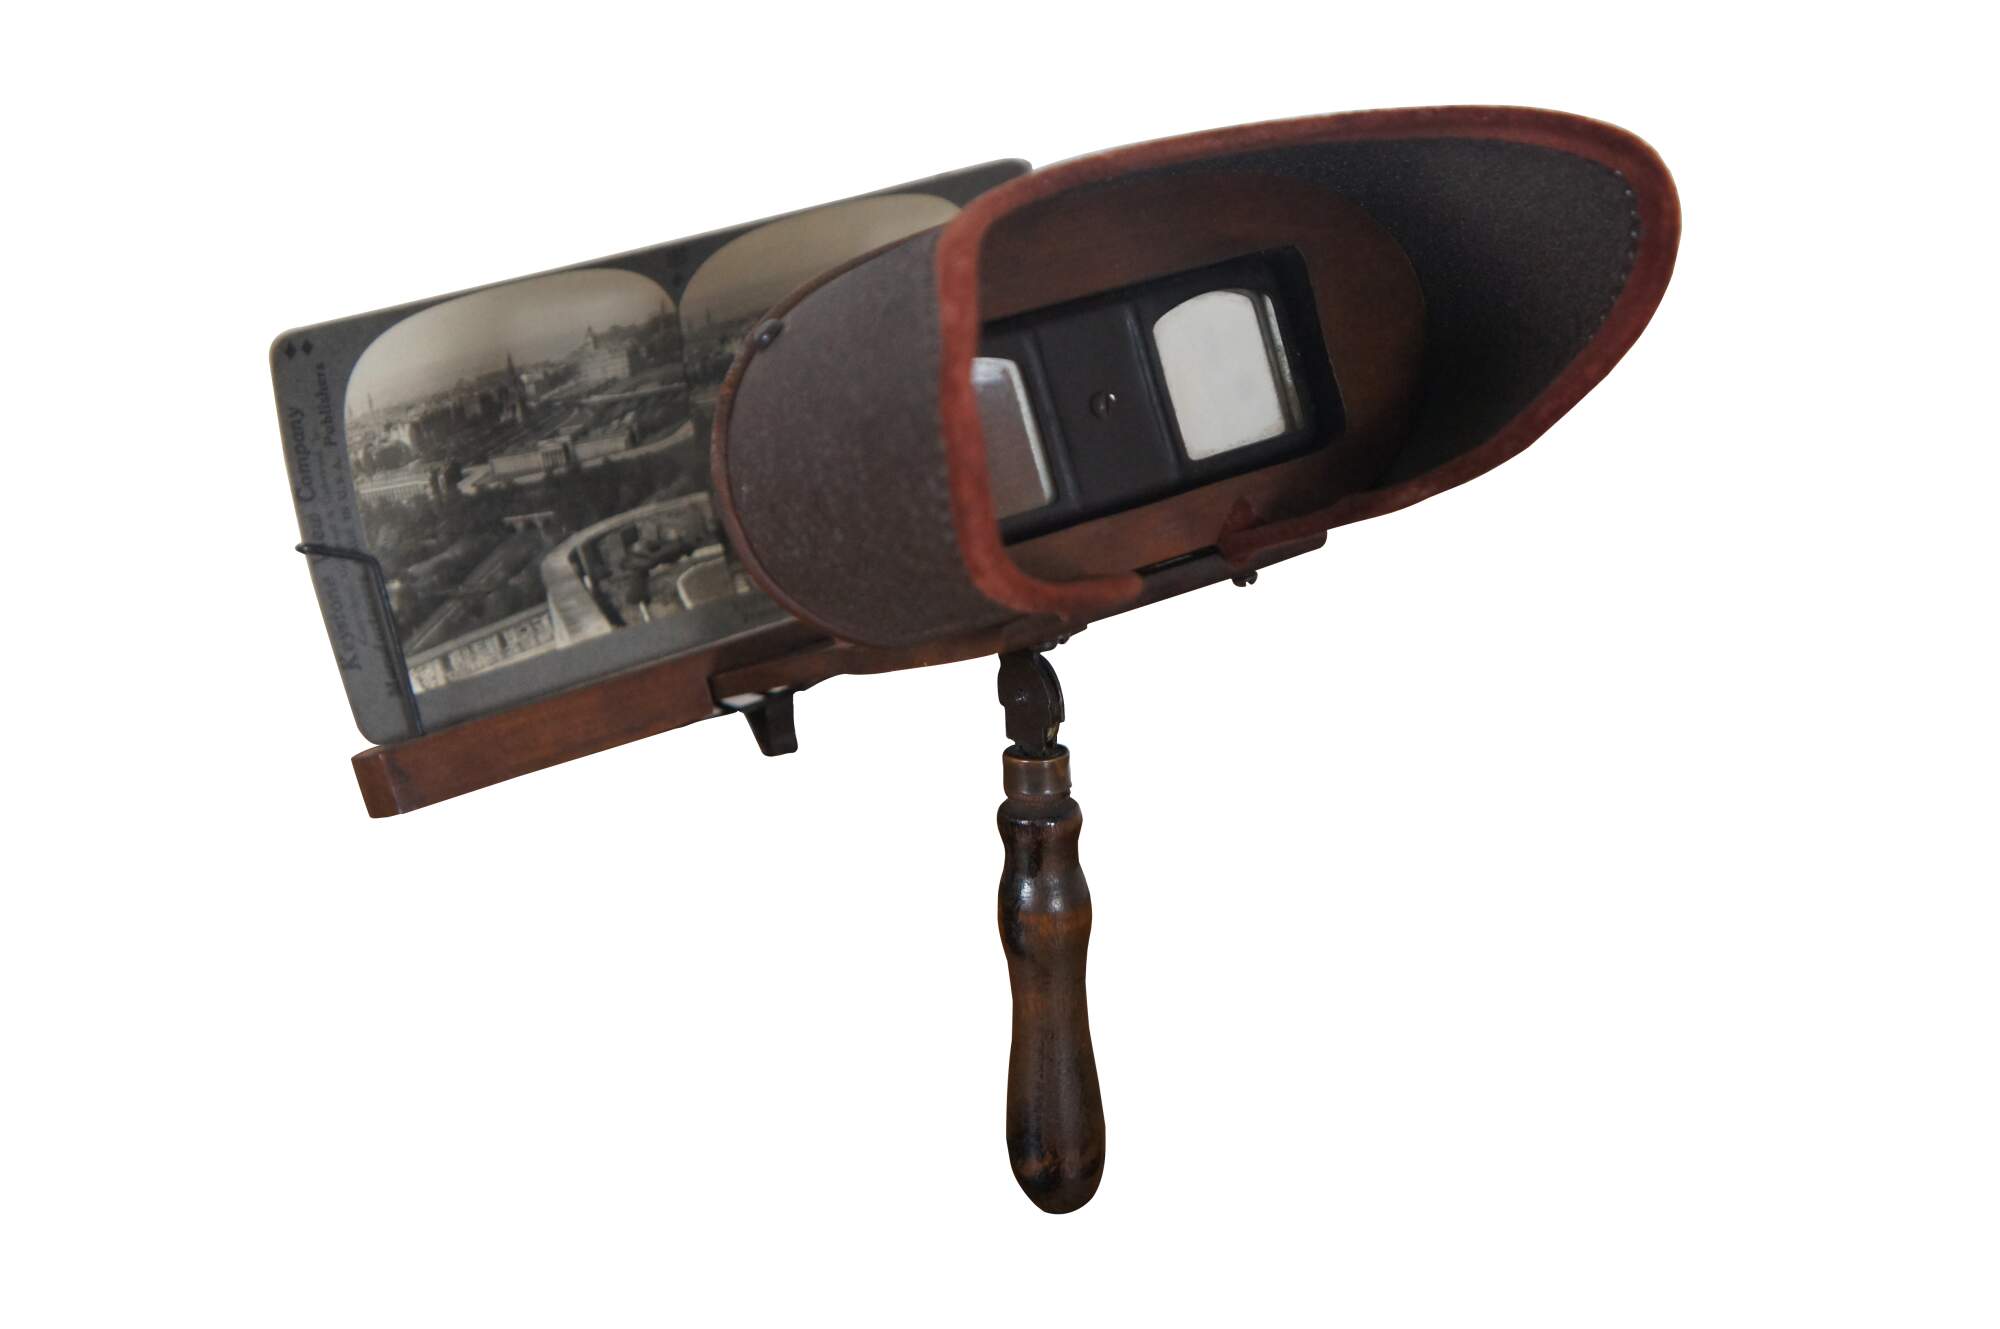 Antique Keystone View Stereo Viewer Stereoscope World Tour Family